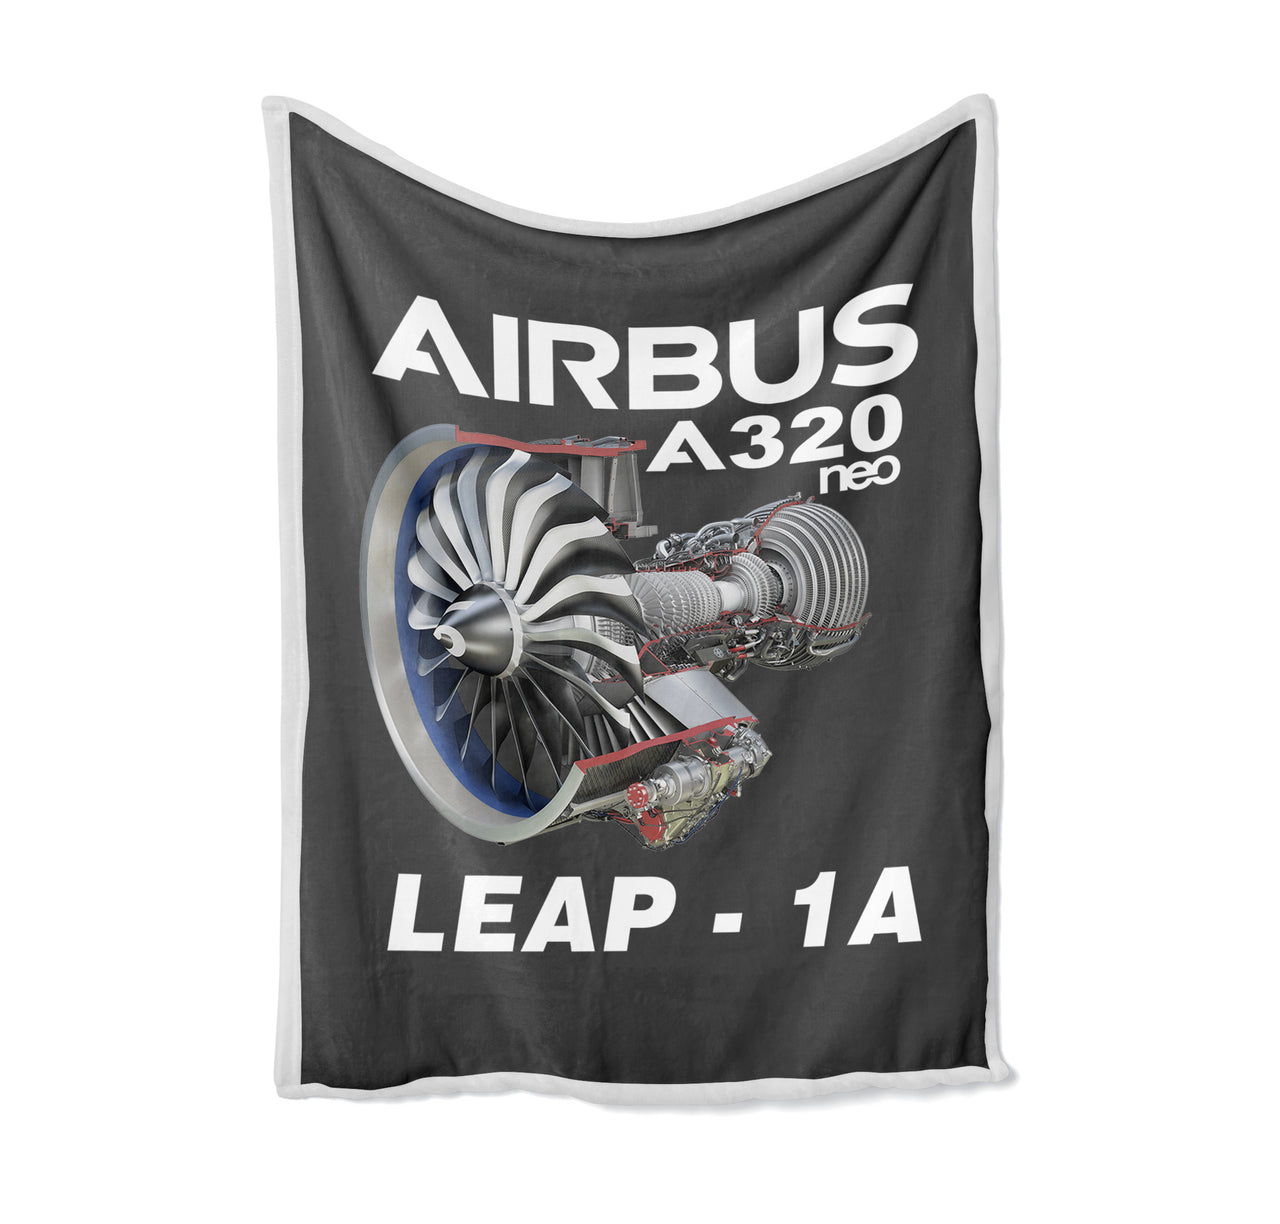 Airbus A320neo & Leap 1A Designed Bed Blankets & Covers